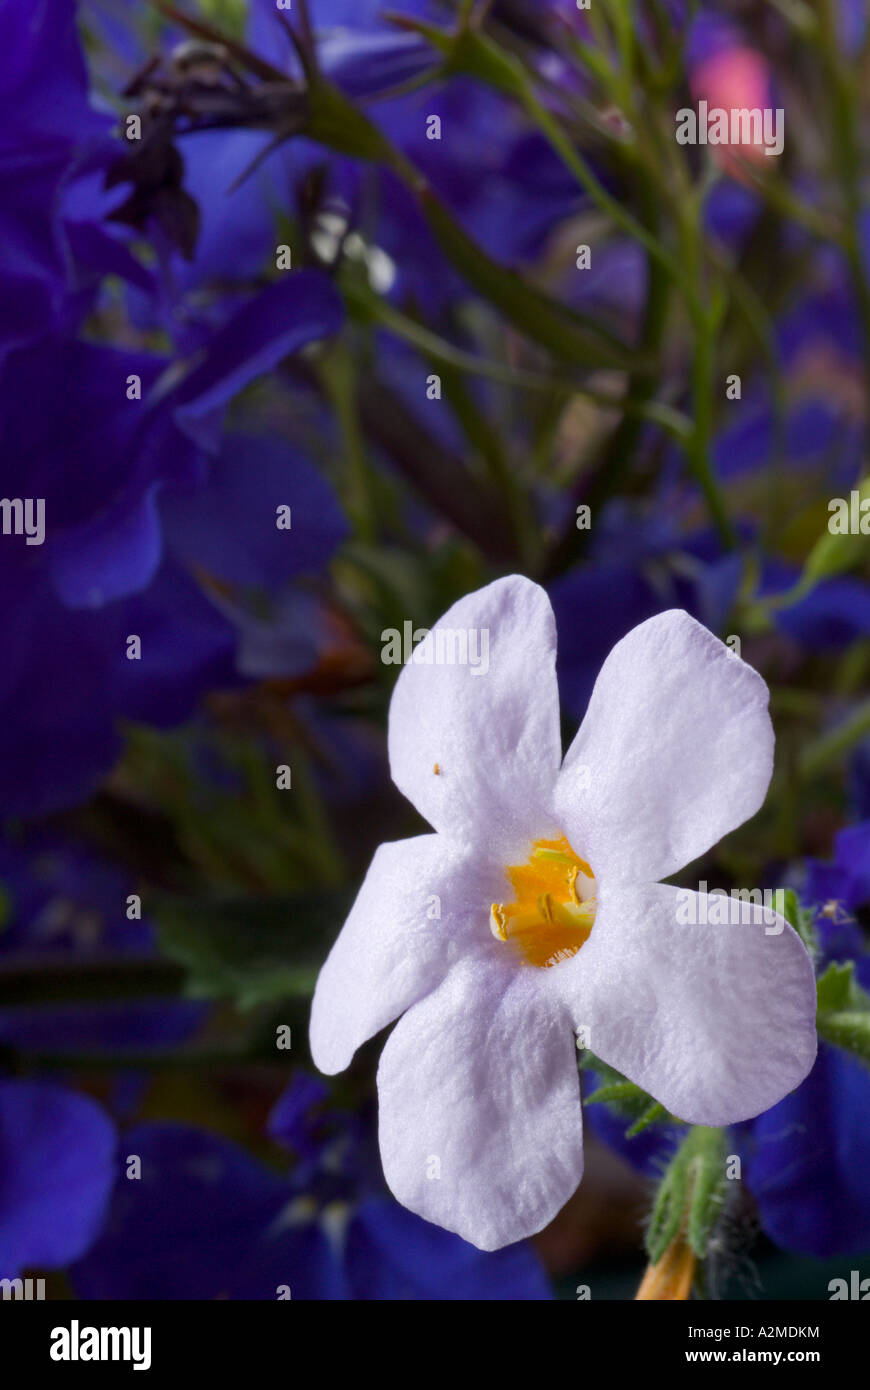 Closeup on a bacopa flower with lobelia in the background. Stock Photo